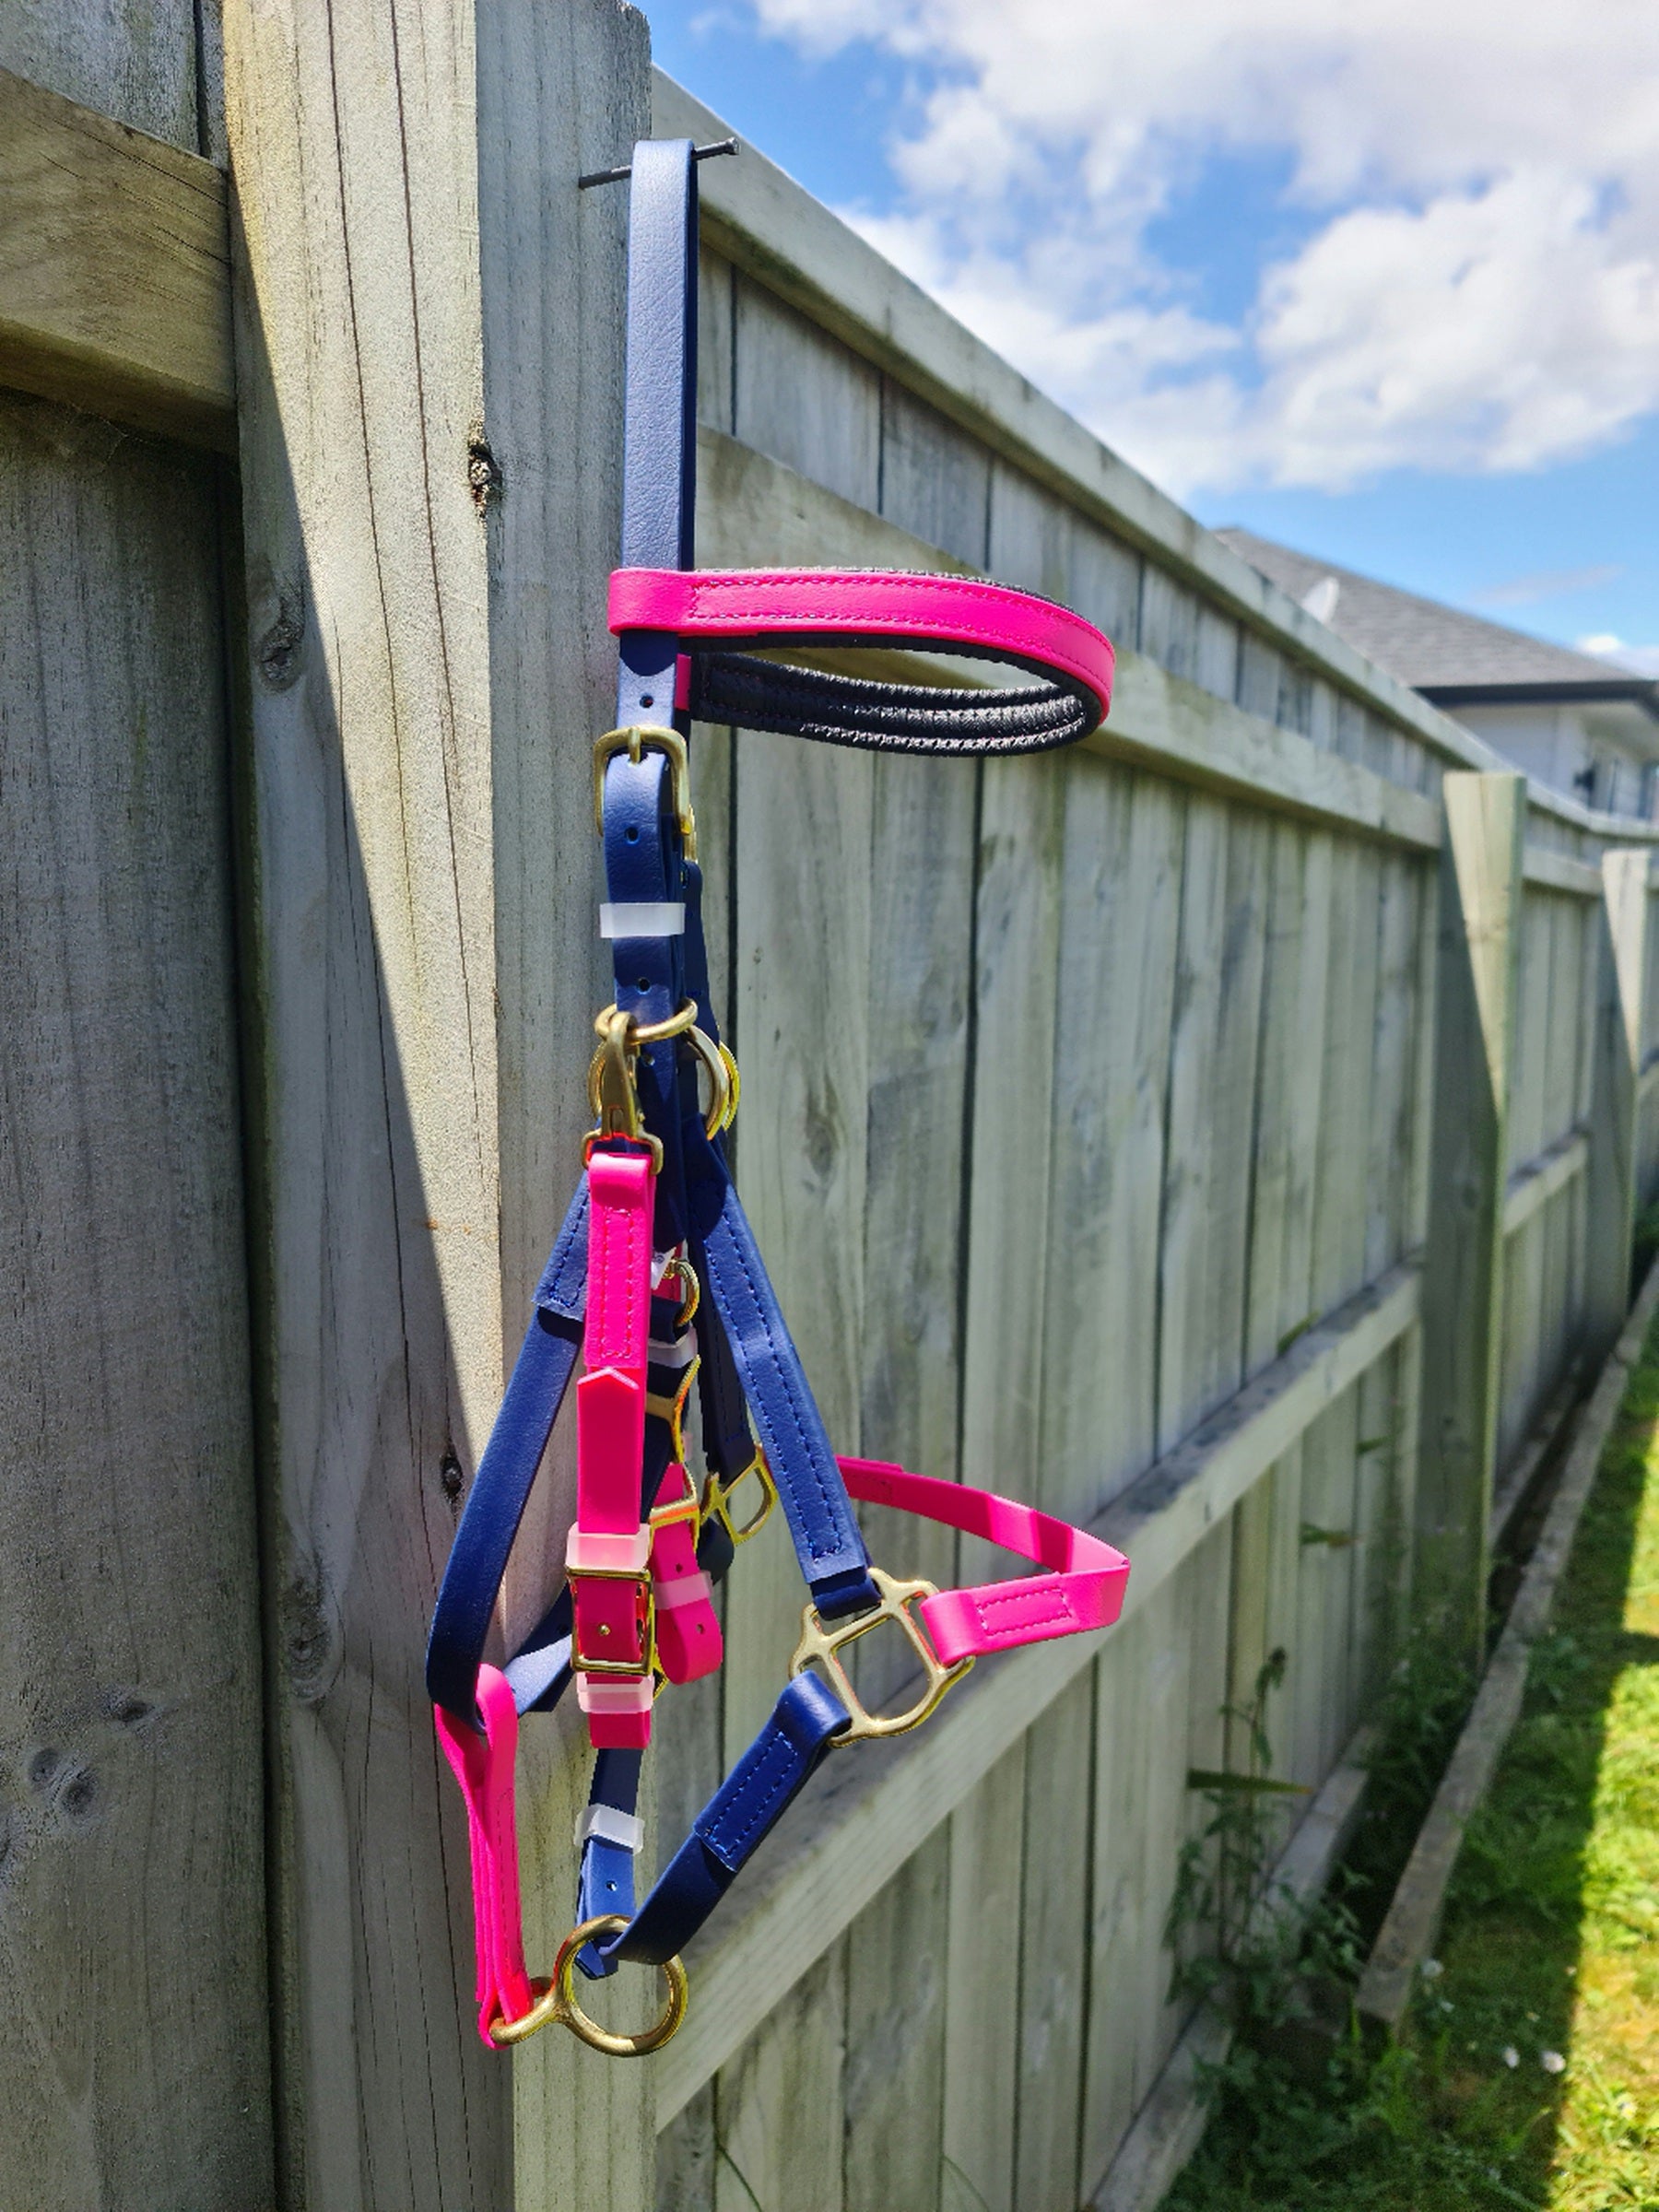 A colorful Bridle - Halter Bridle Navy & Pink by LS Equestrian with blue and pink BioThane straps hangs on a wooden fence under a sunny sky. The fence stretches into the distance, and a house with a grey roof is visible in the background. The halter features gold metal rings and clips.